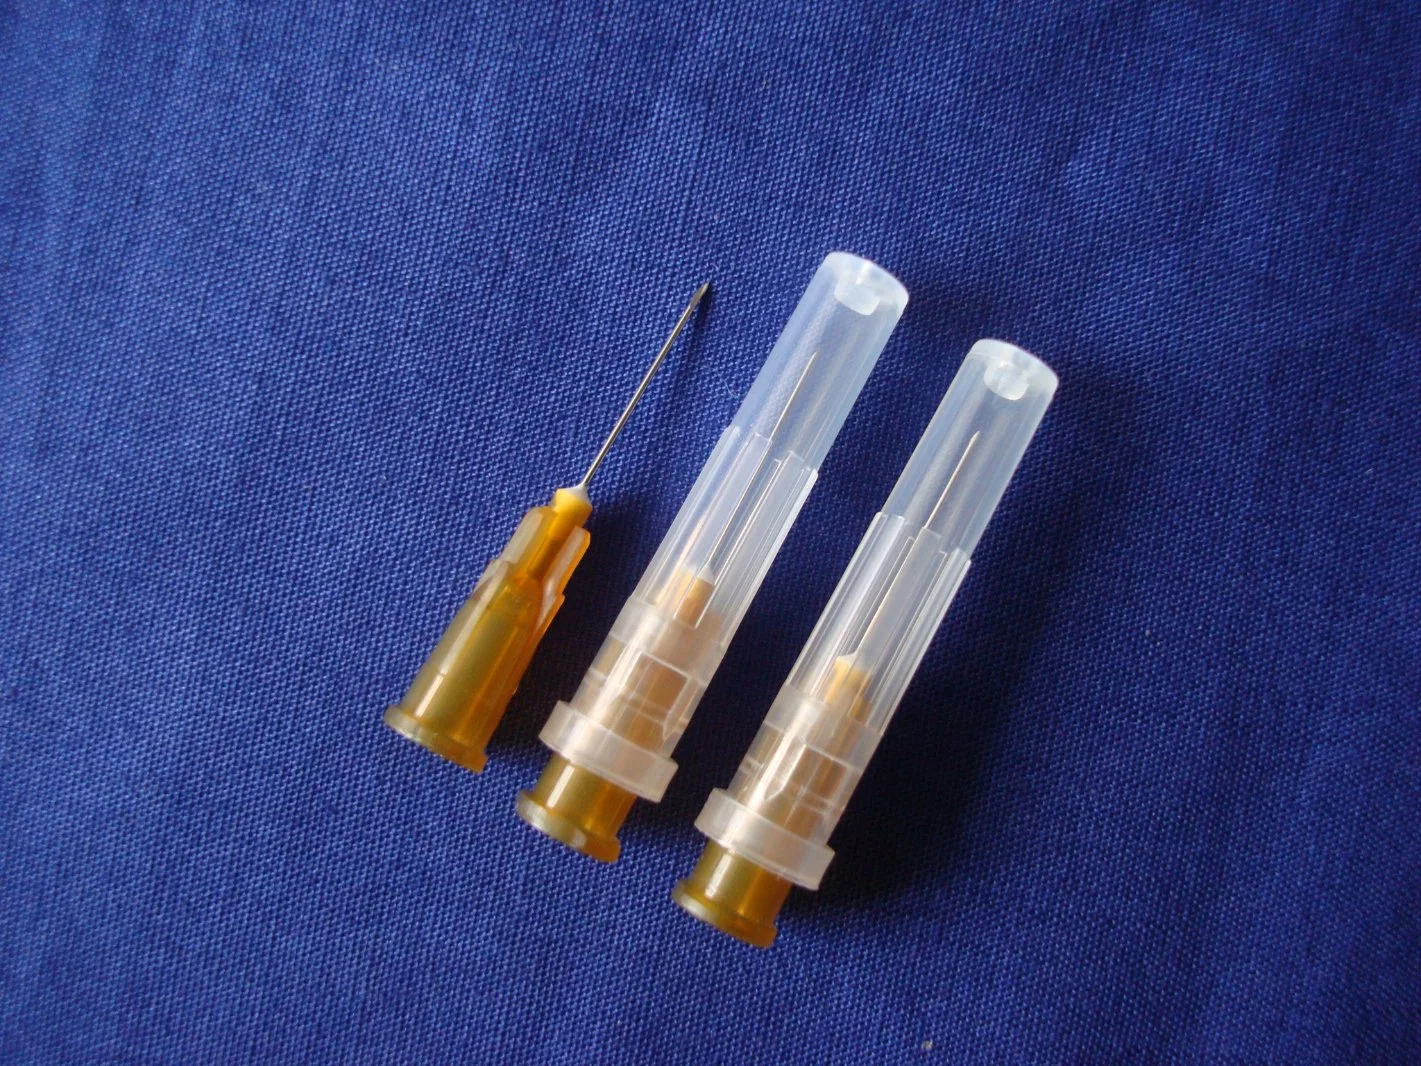 Needle for Disposable Injection Hypodermic, Syringe and Infusion Set, 100PCS/Box, 14G-34G